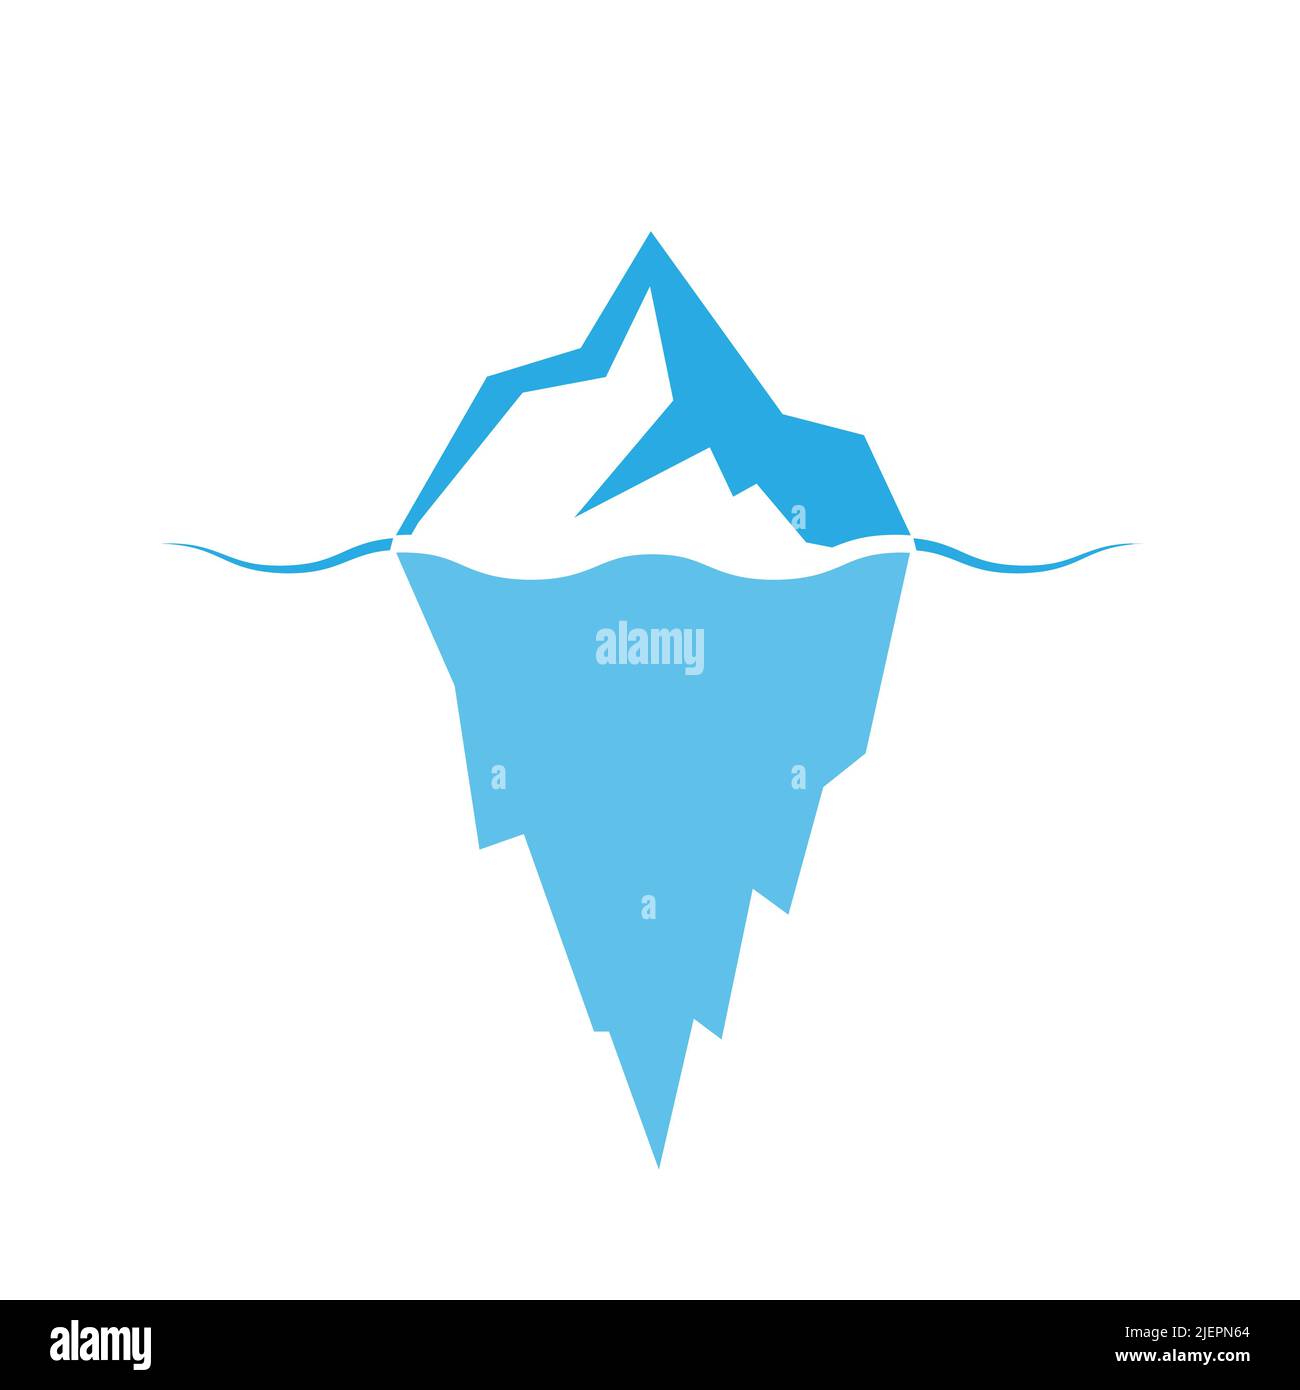 Iceberg. Vector icon of a glacier drifting across the ocean. Illustration for website, application and creative design. Flat style Stock Vector